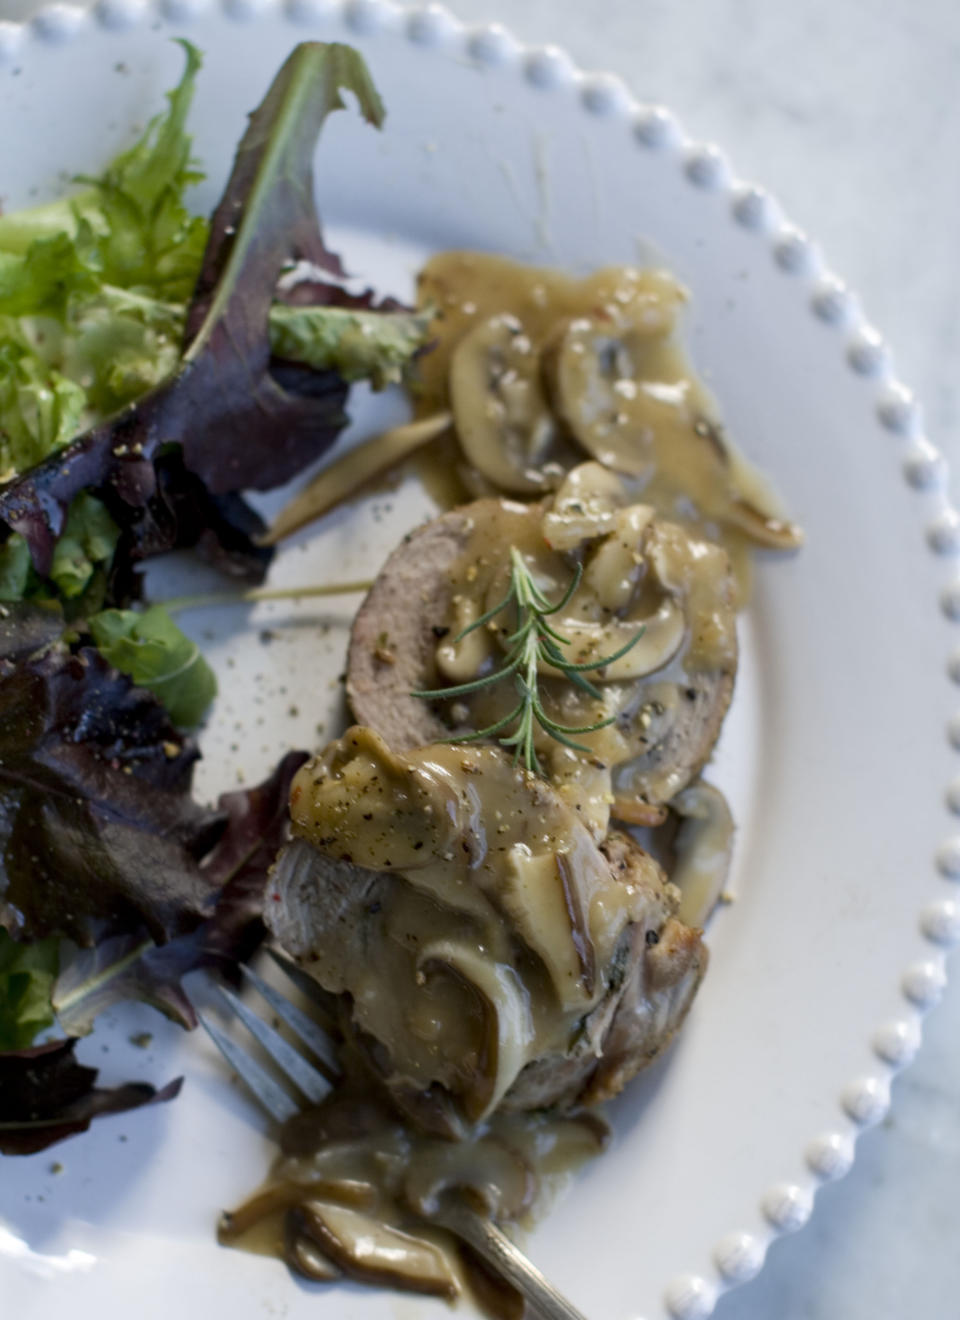 This Nov. 18, 2013 photo shows double pork roast with mushroom marsala sauce in Concord, N.H. (AP Photo/Matthew Mead)